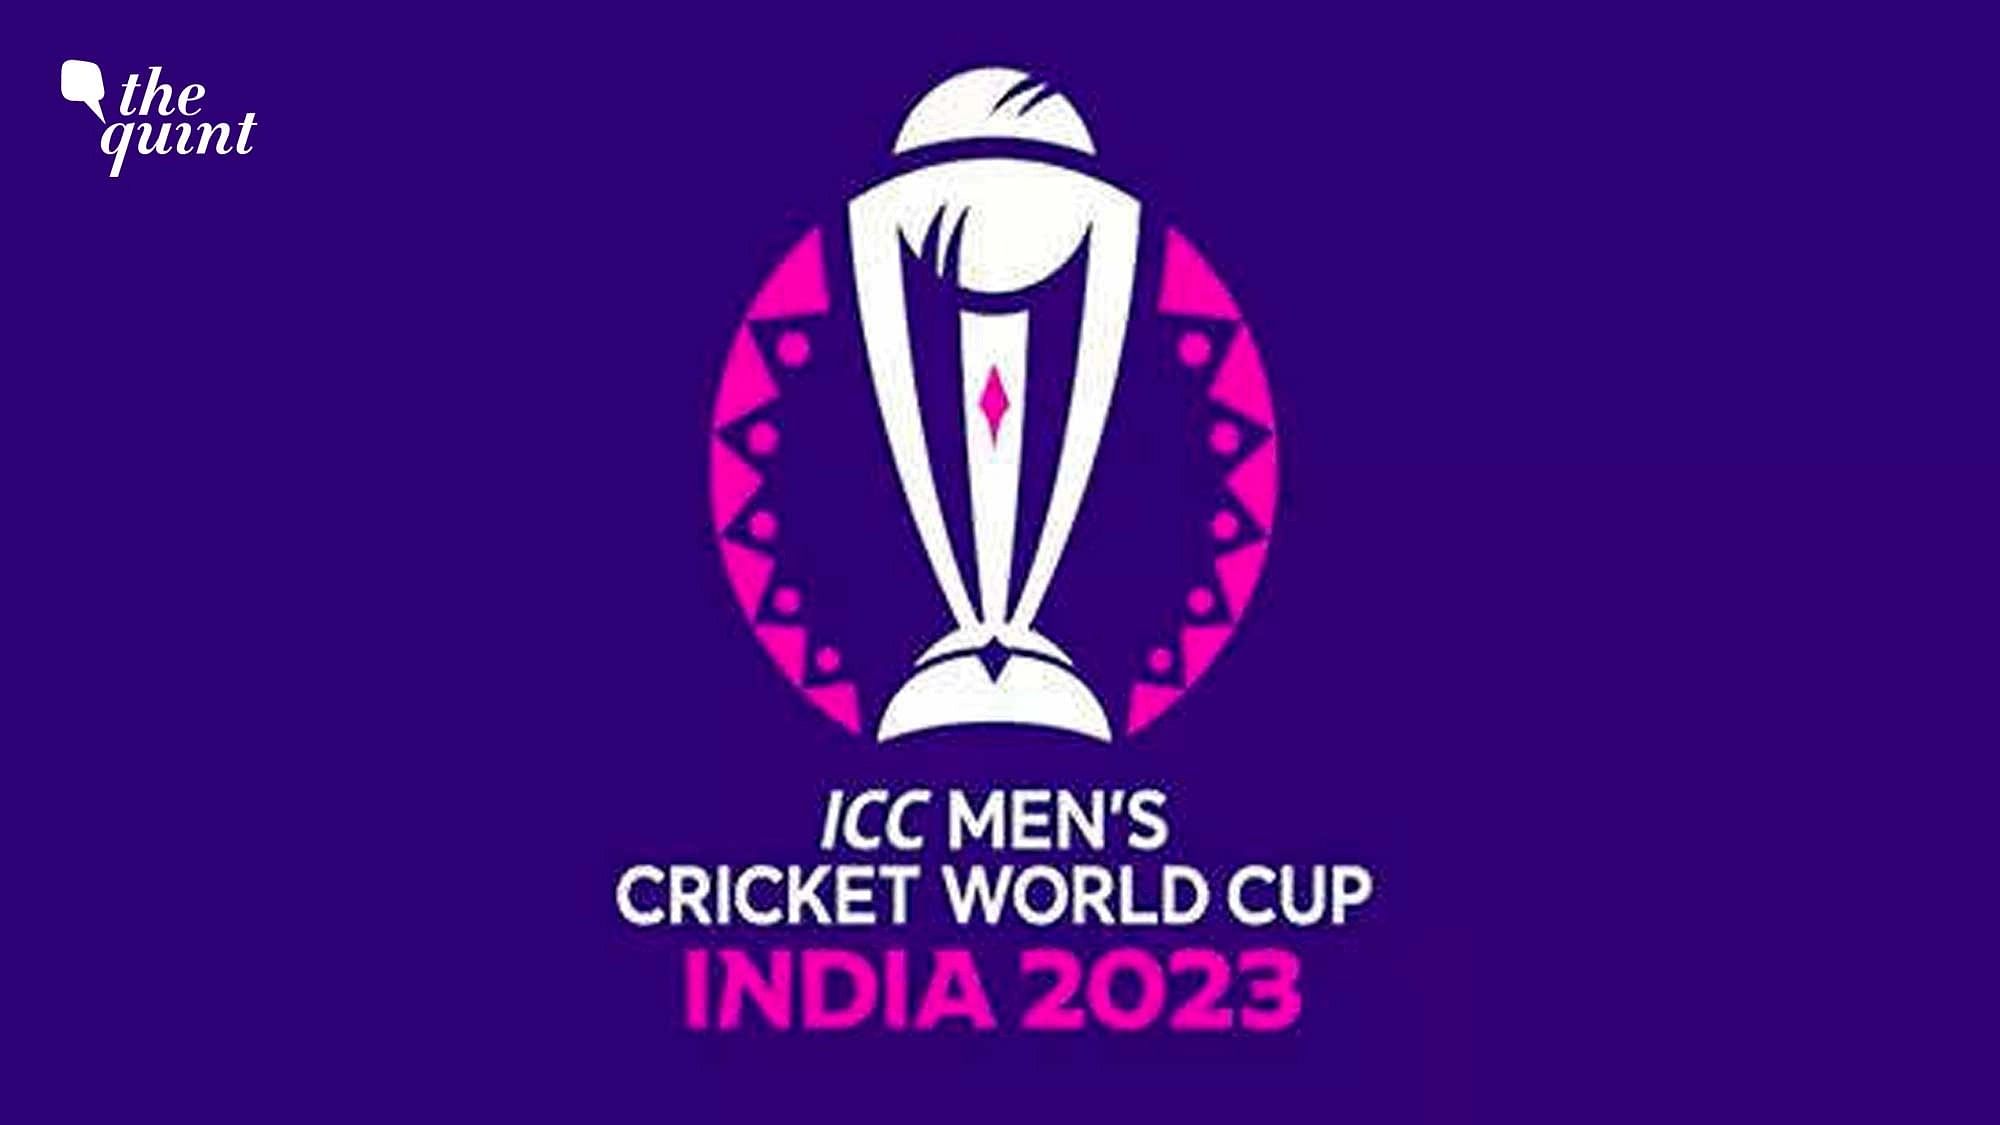 India vs Australia ICC Mens Cricket World Cup 2023 Live Date, Time, Venue, When and Where to Watch IND vs AUS Live Streaming, Latest Details Here